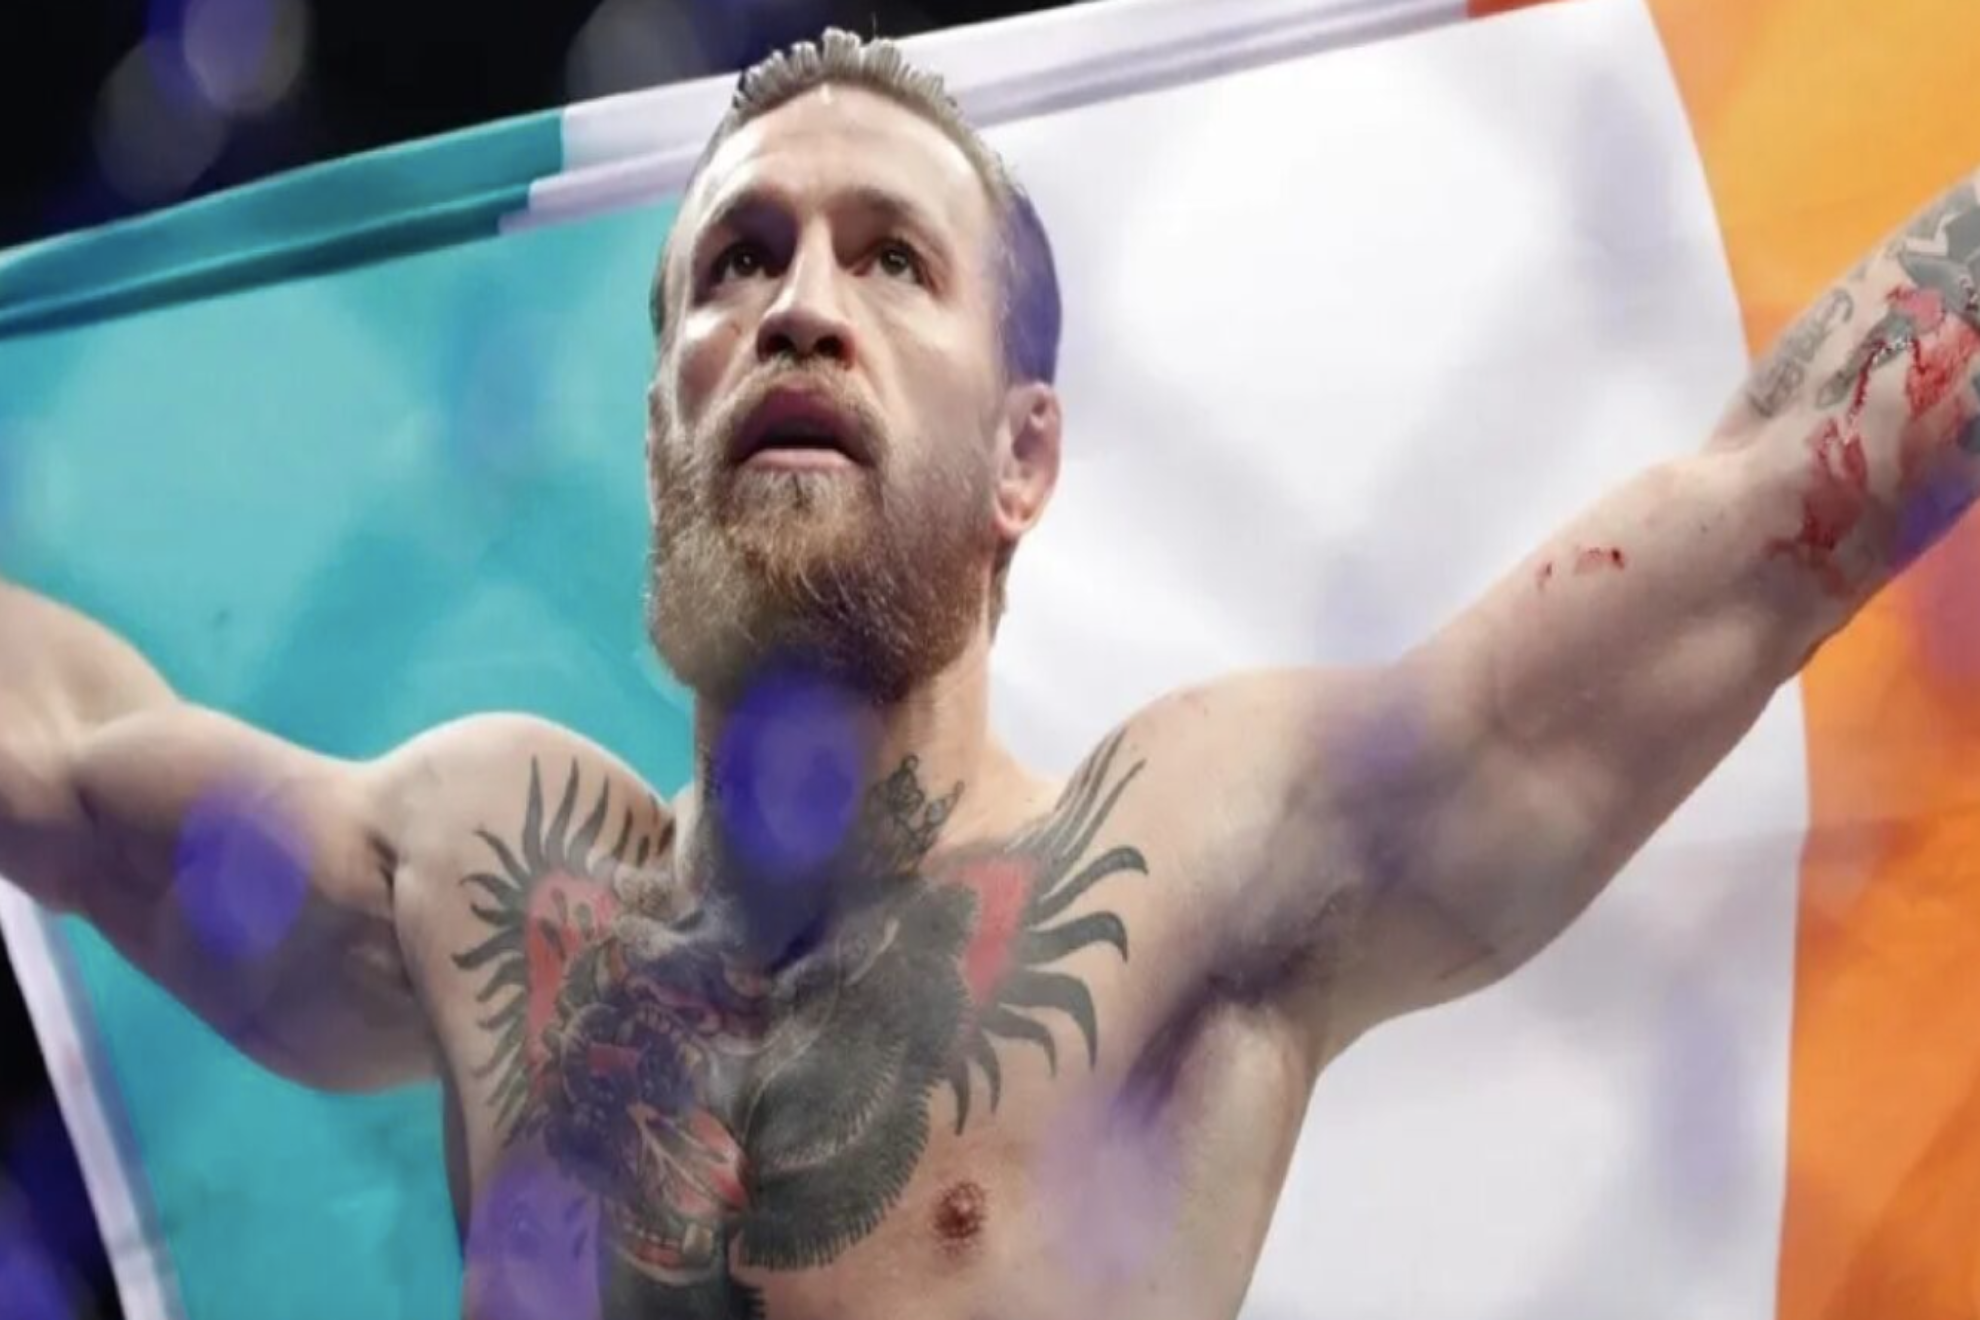 Nate Diaz reacts to learning that his foe Conor McGregor got richer by winning a bet because of him